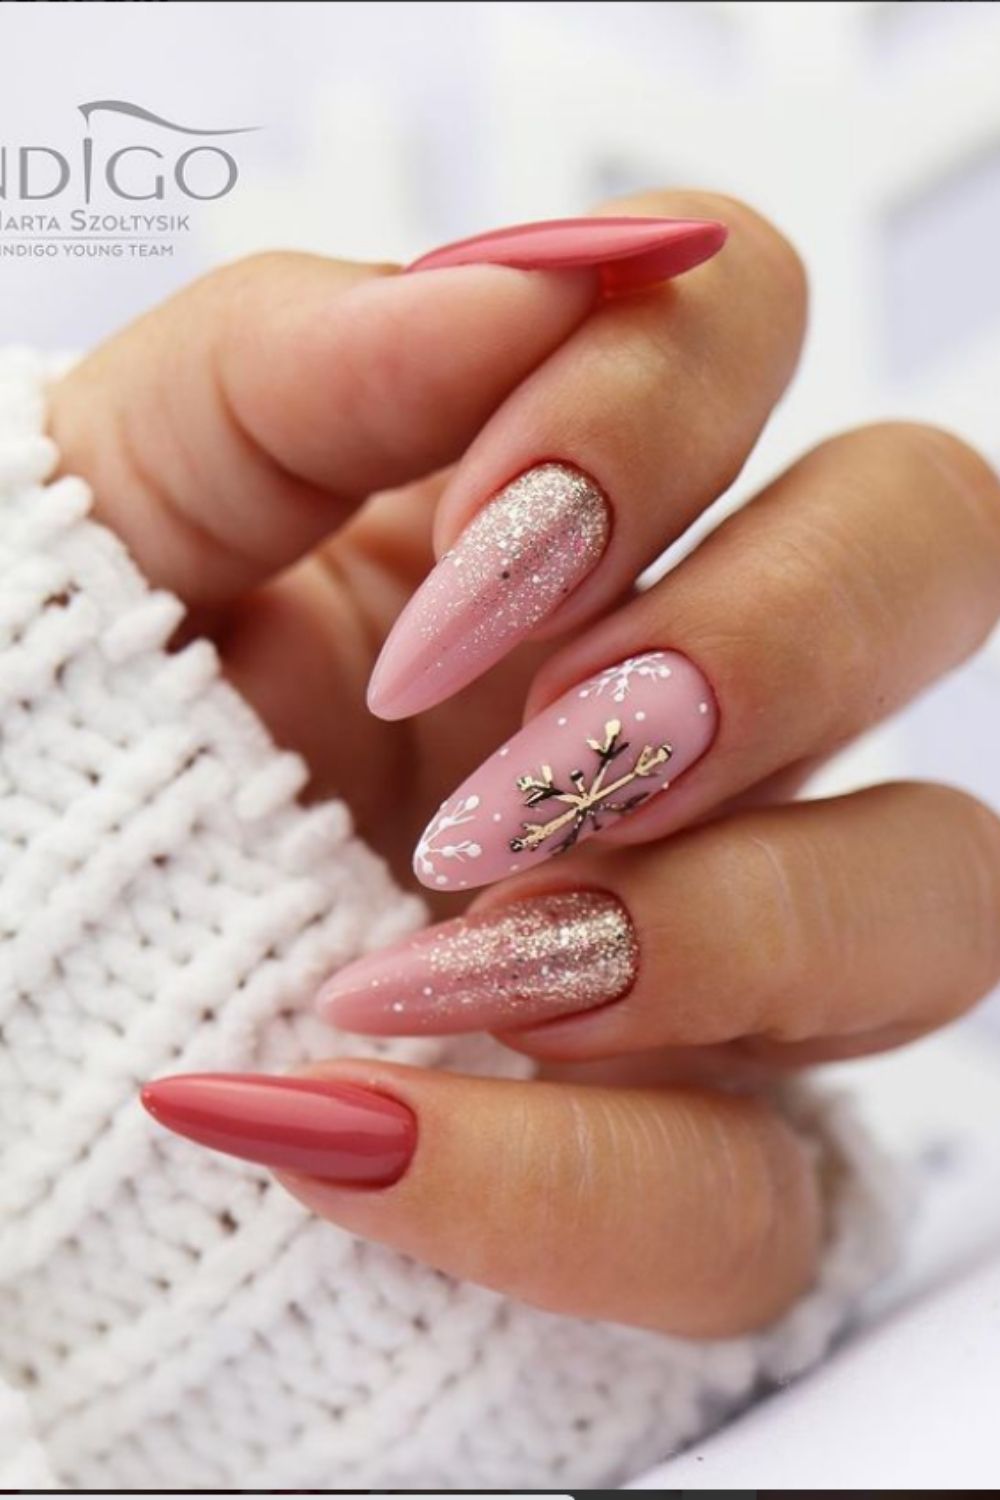 Almond nails with glitting